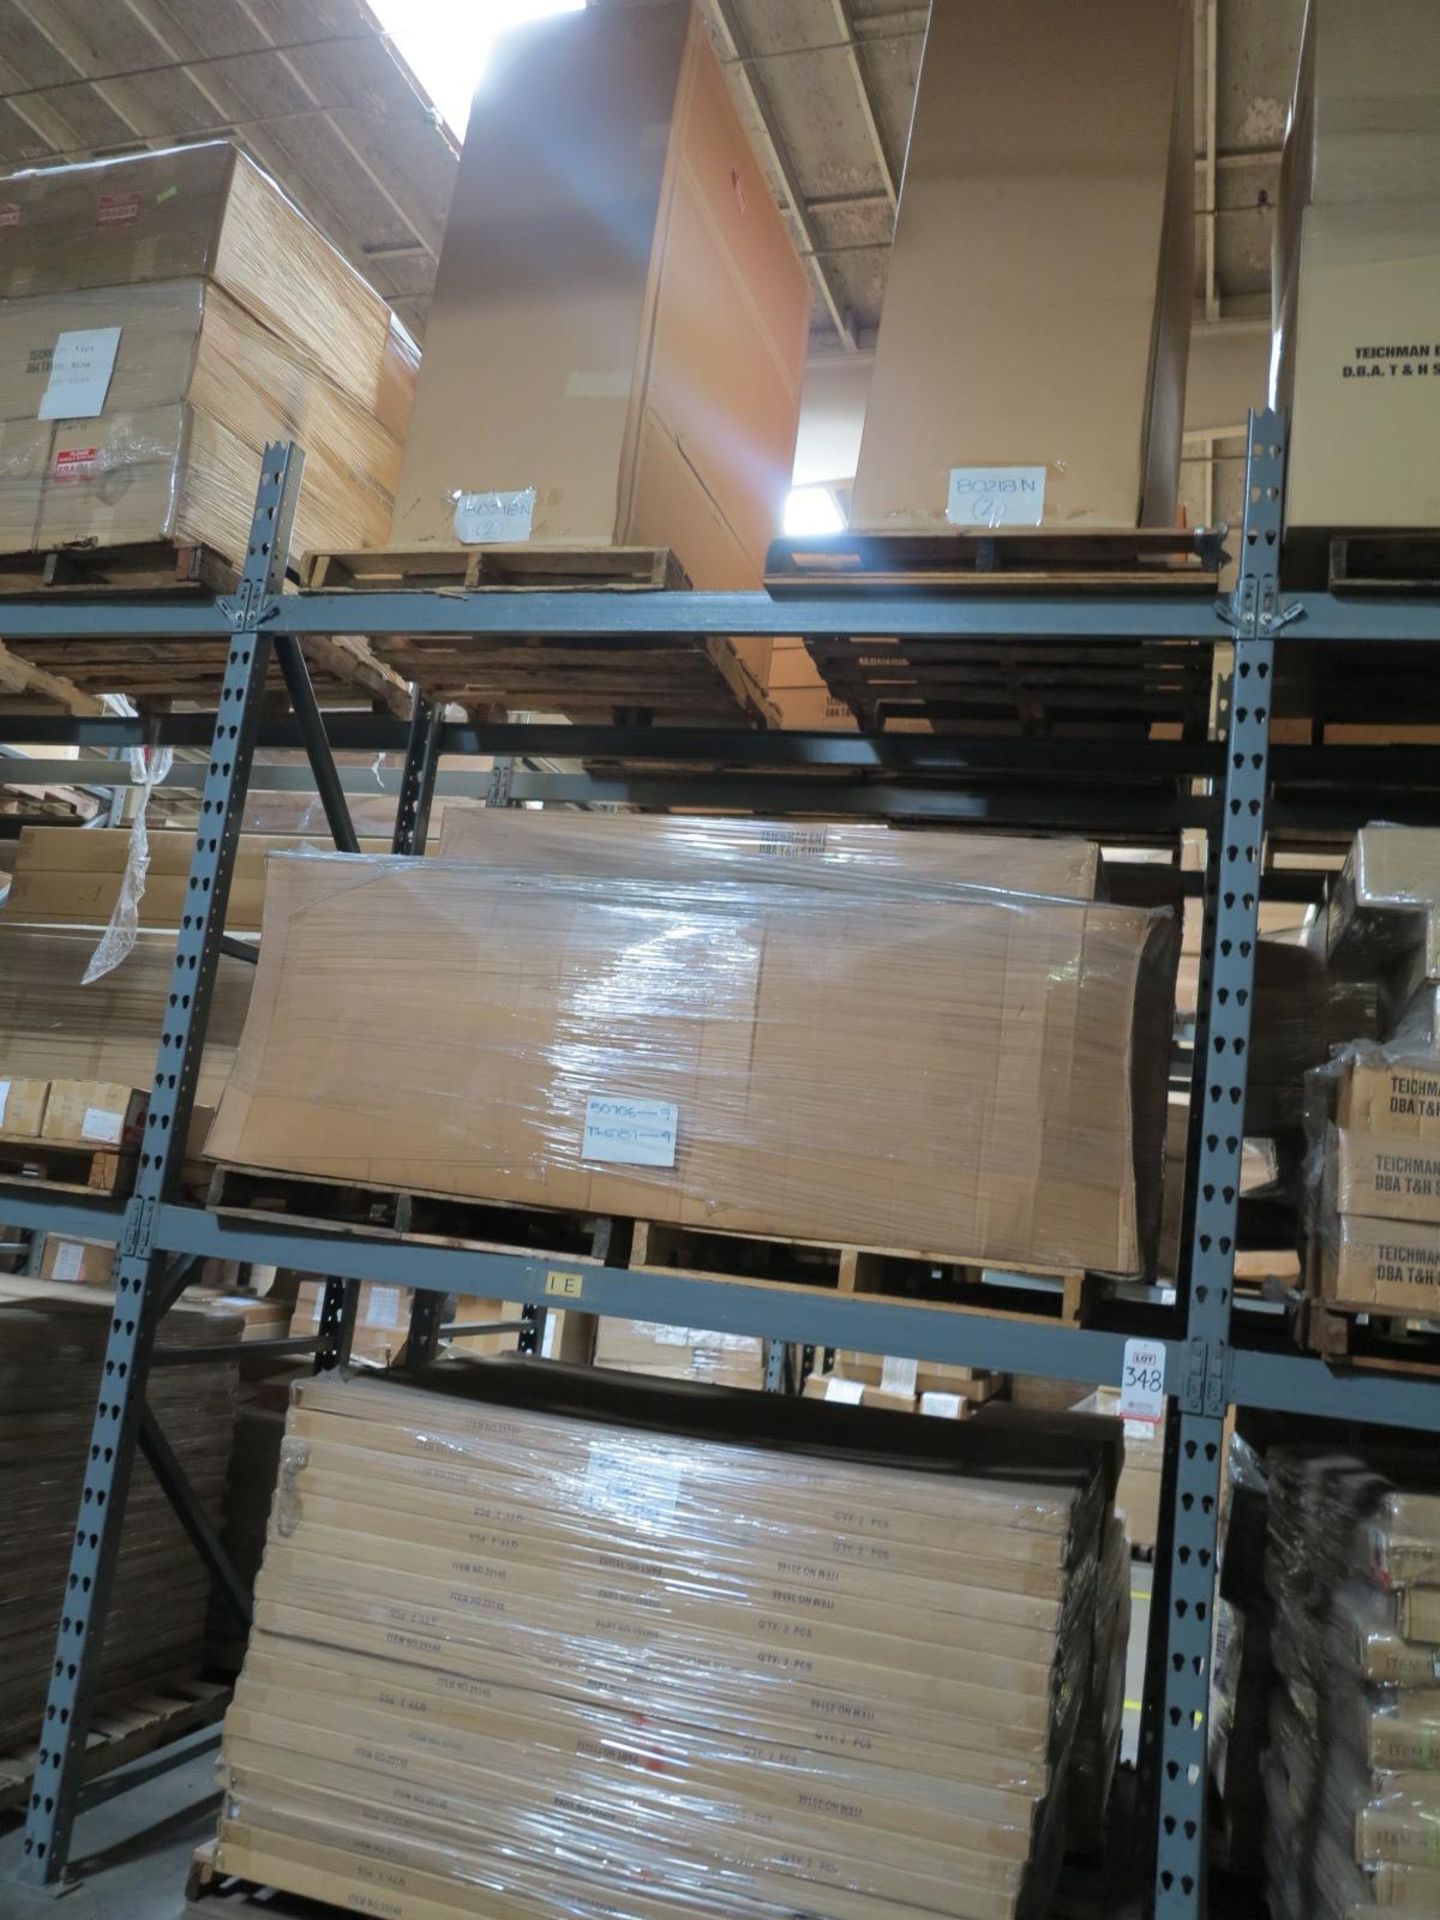 LOT - CONTENTS OF (2) SECTIONS OF PALLET RACK TO INCLUDE: ITEM # 50706, 4FT. L ADD ON SET 67"